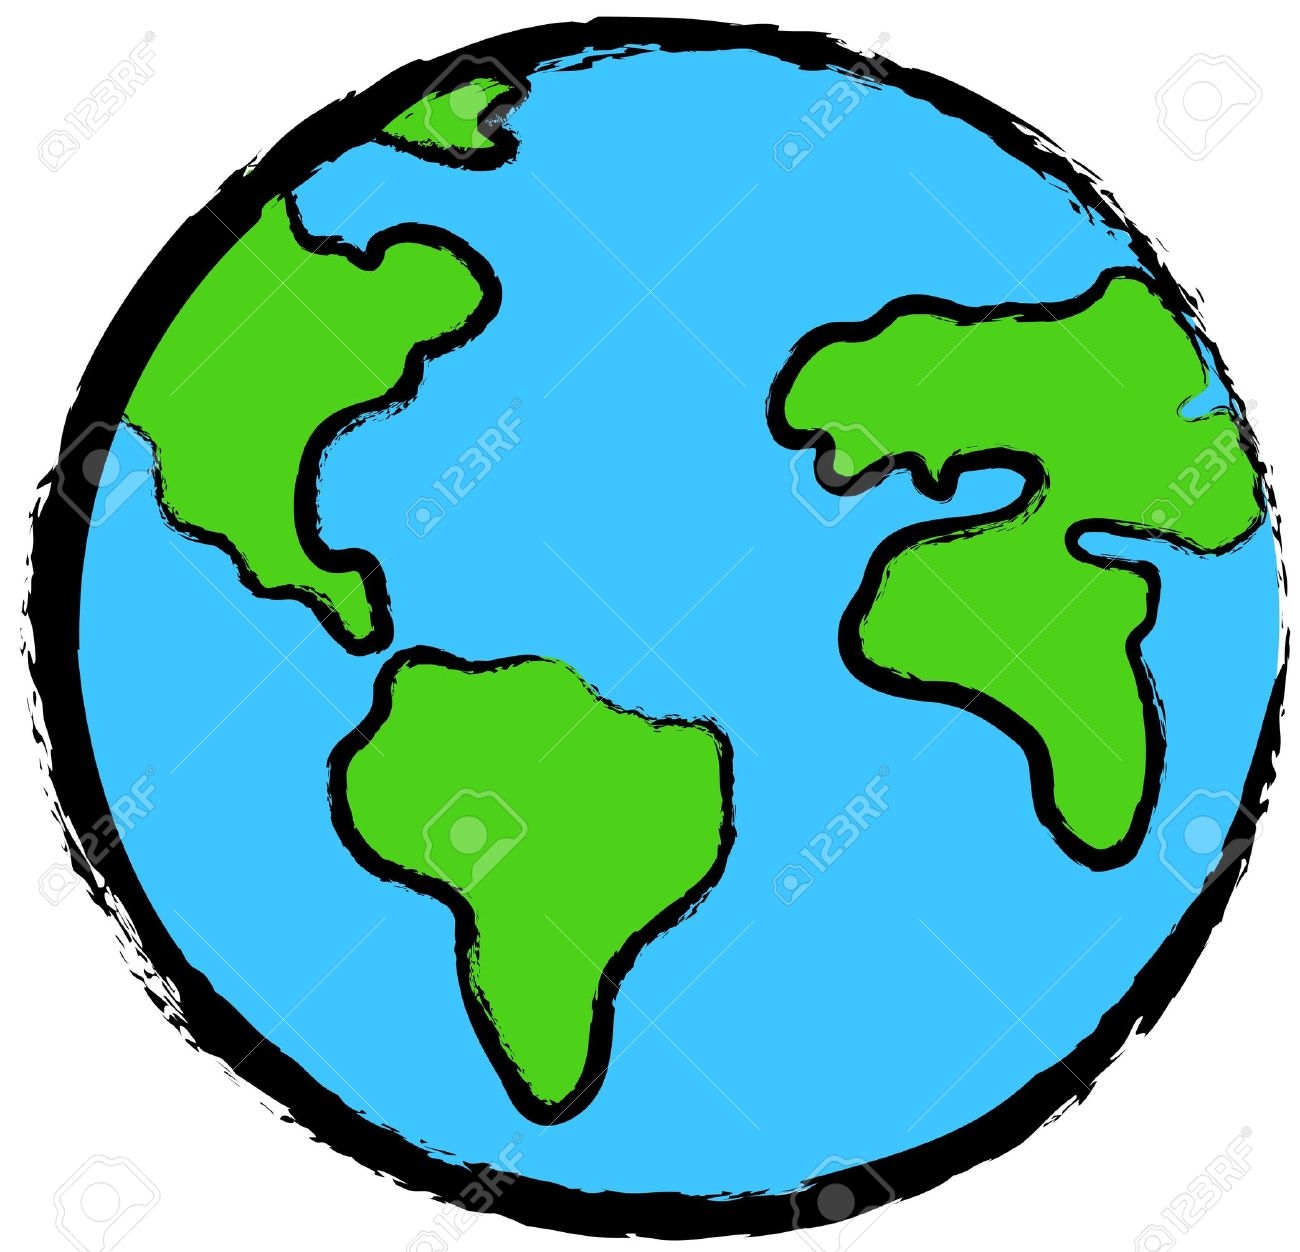 Earth clipart Luxury Planet Earth clipart art Pencil and in.